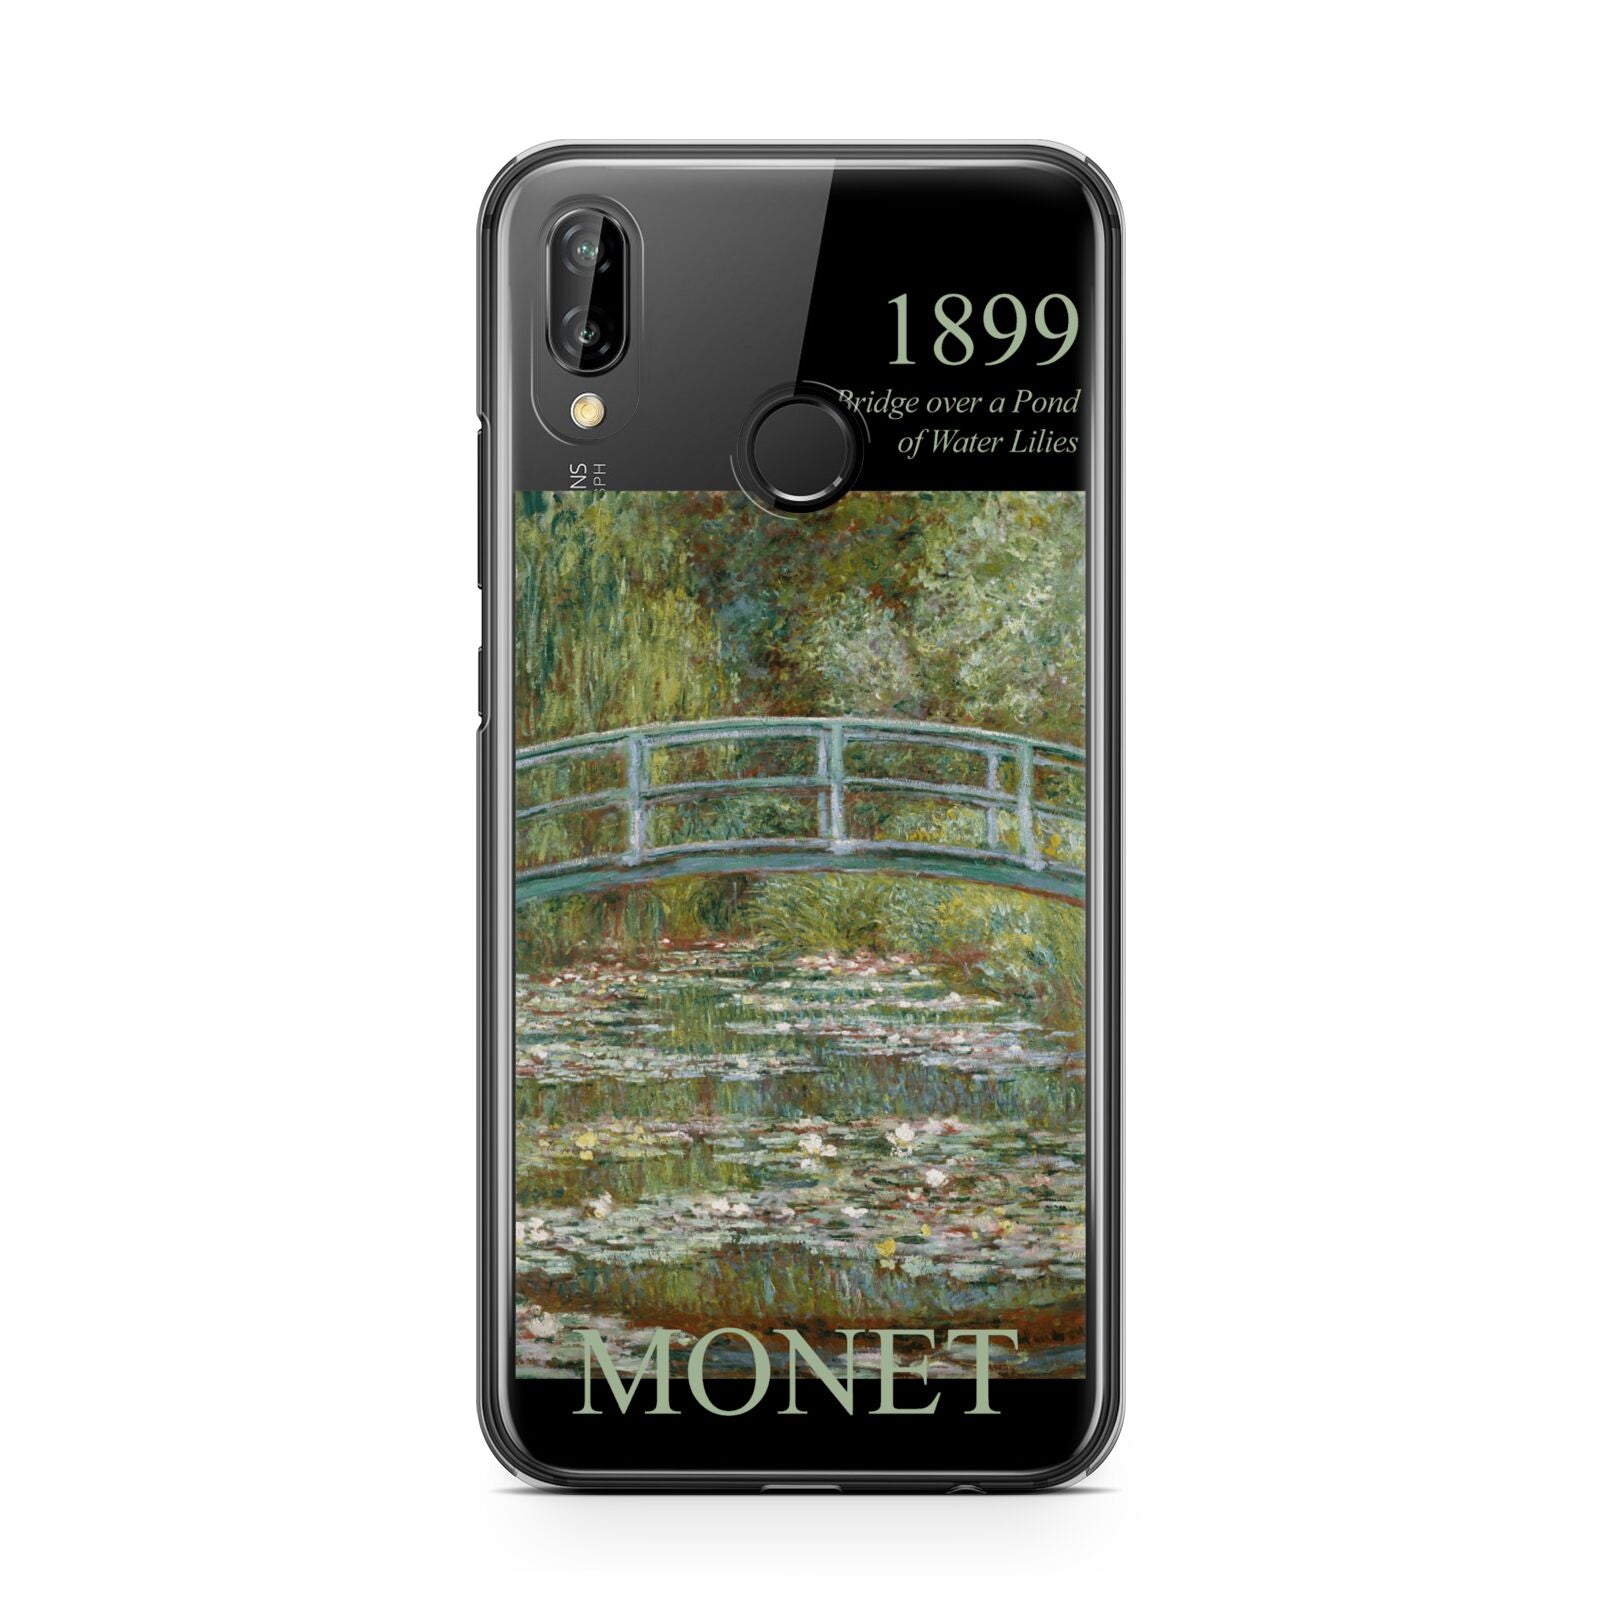 Bridge Over A Pond Of Water Lilies By Monet Huawei P20 Lite Phone Case